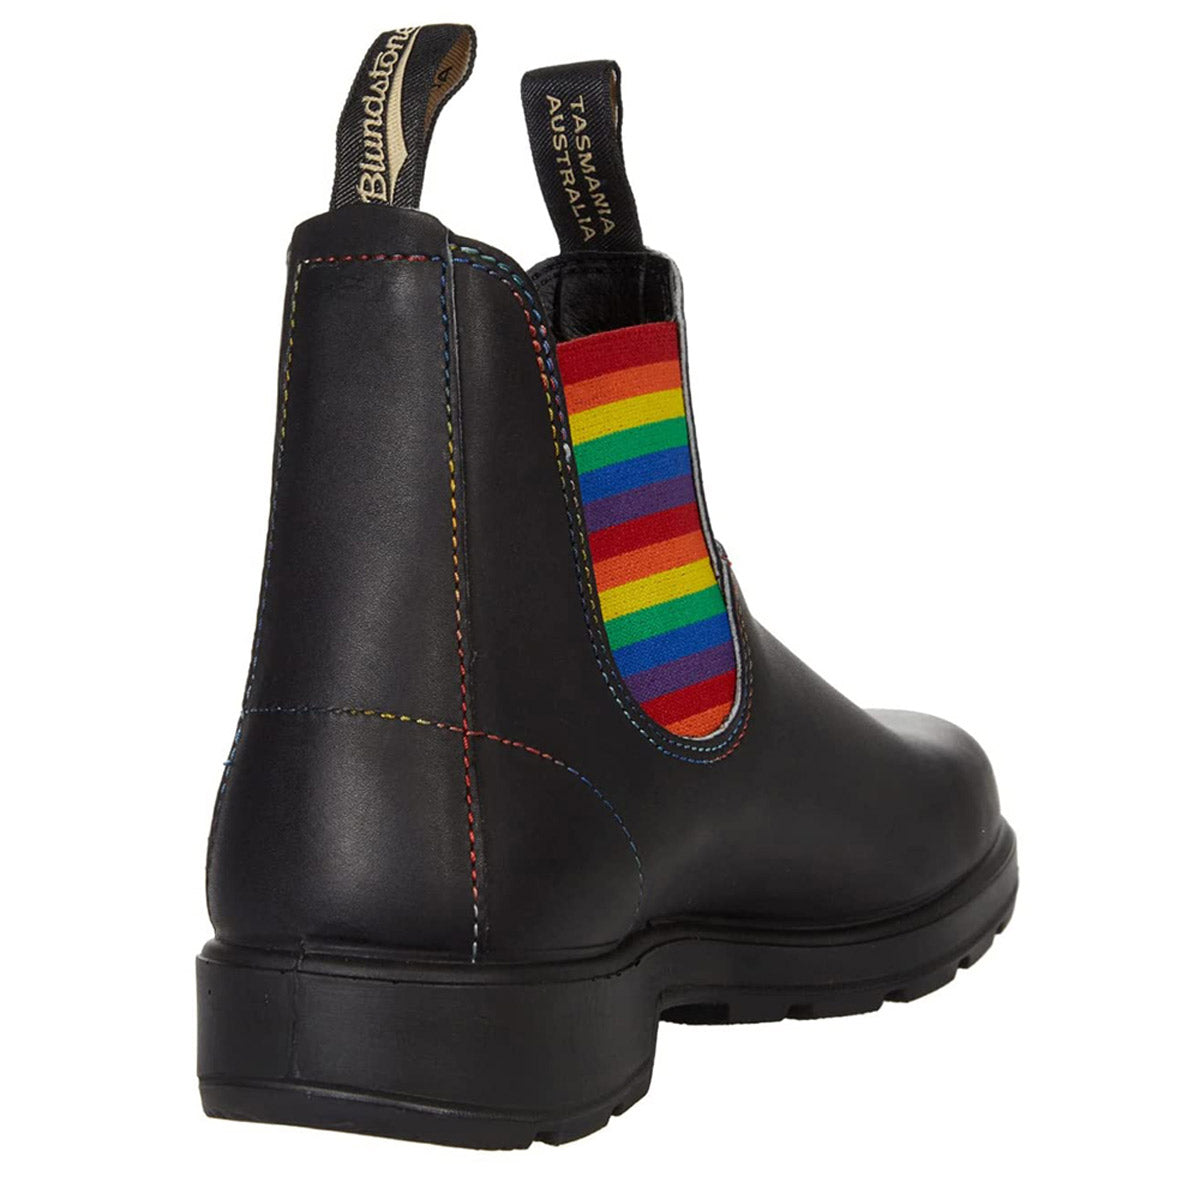 A Blundstone Original 500 series boot with rainbow-colored elastic side panels celebrating the LGBTQIA+ community.